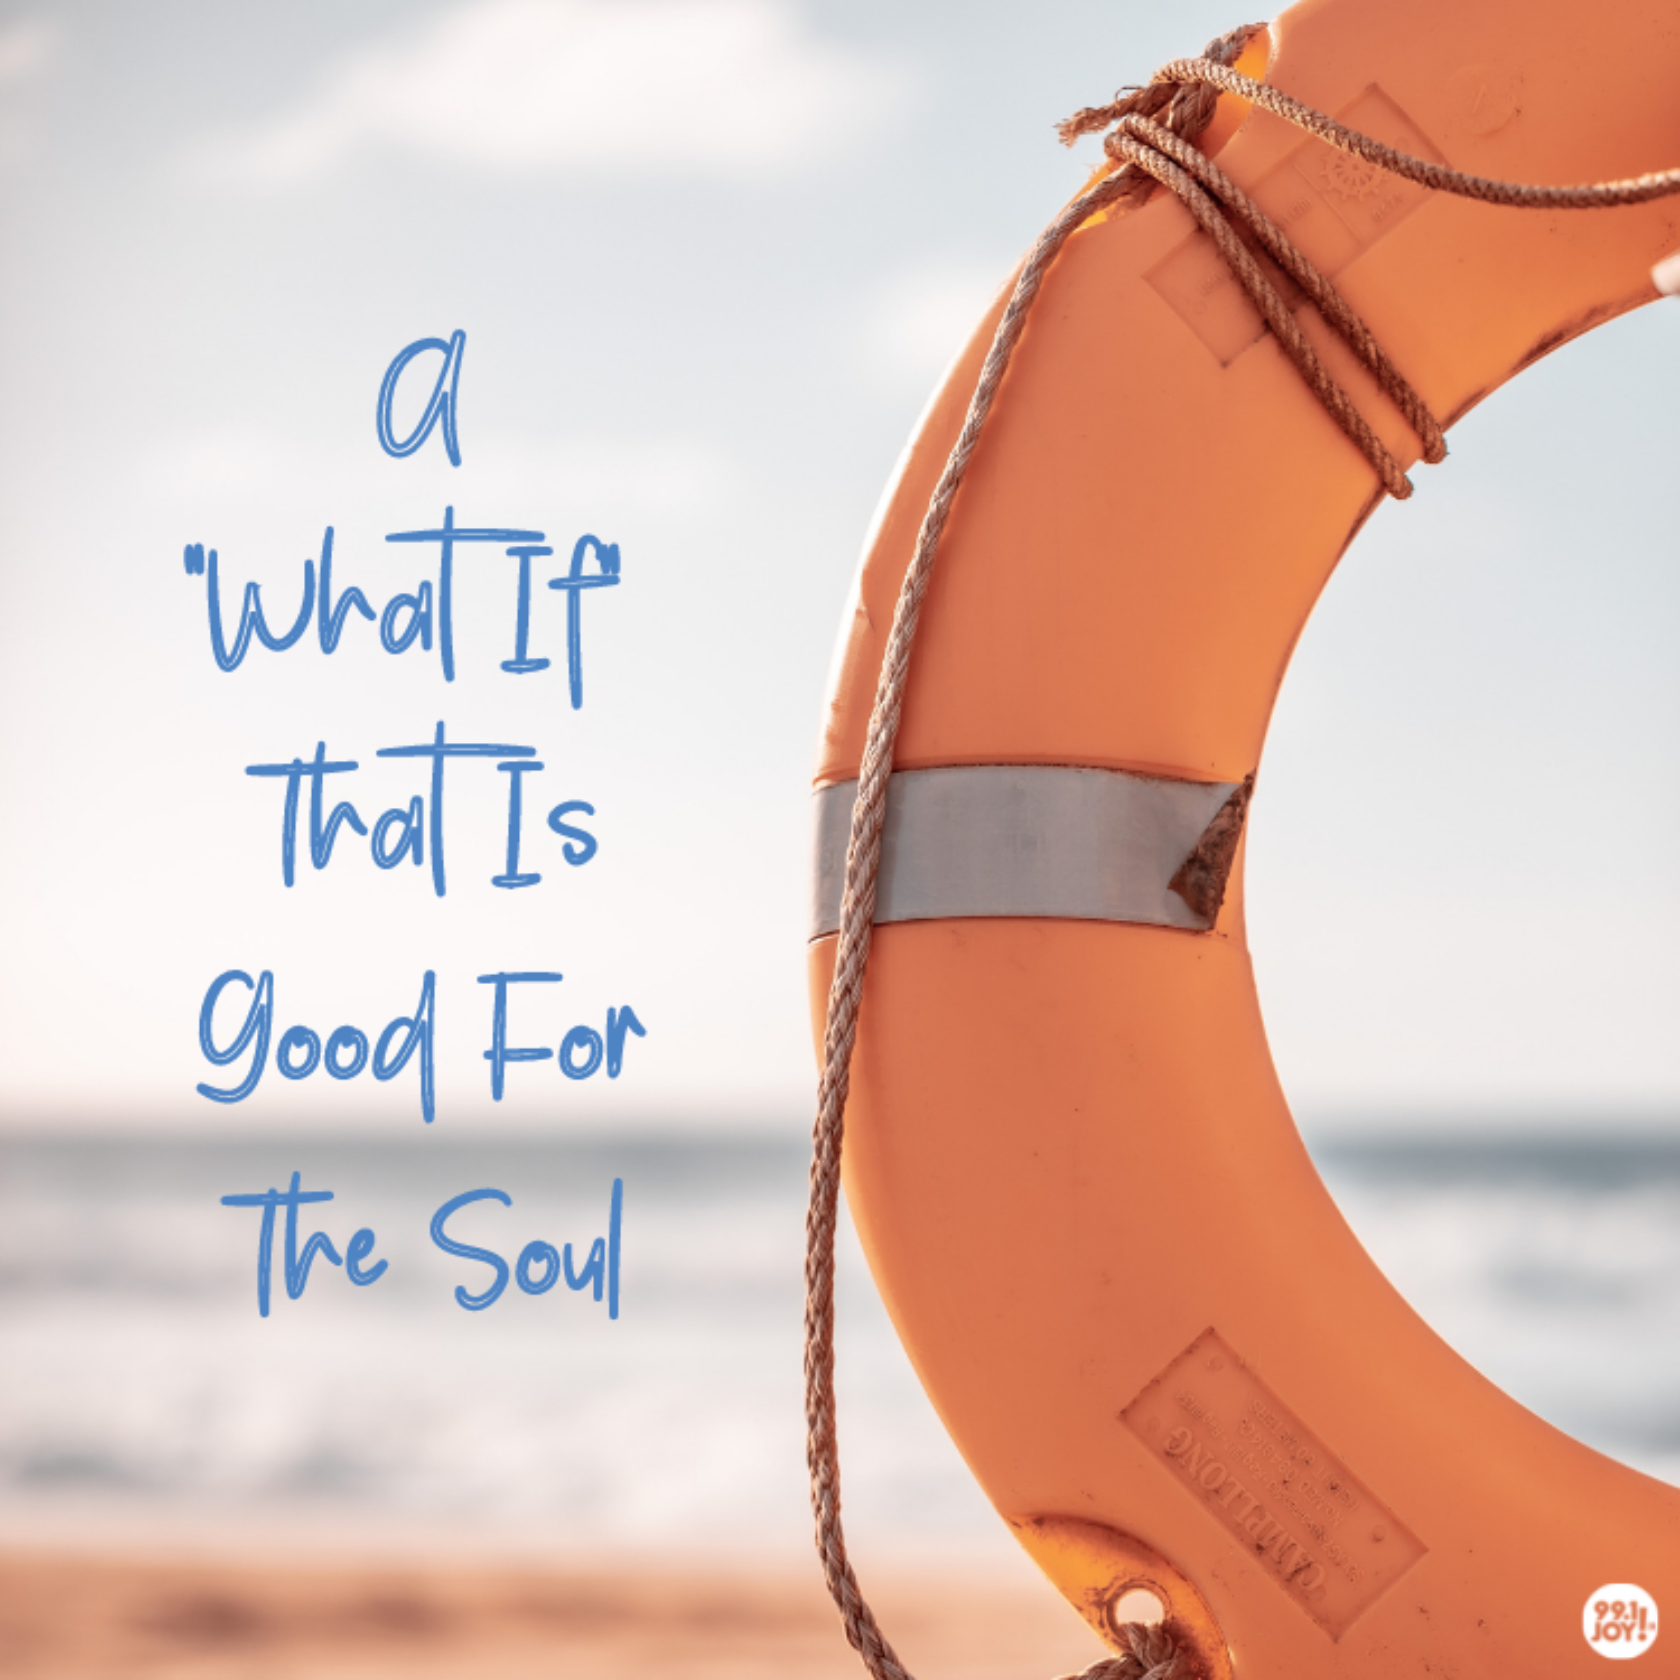 A “What If” That Is Good For The Soul